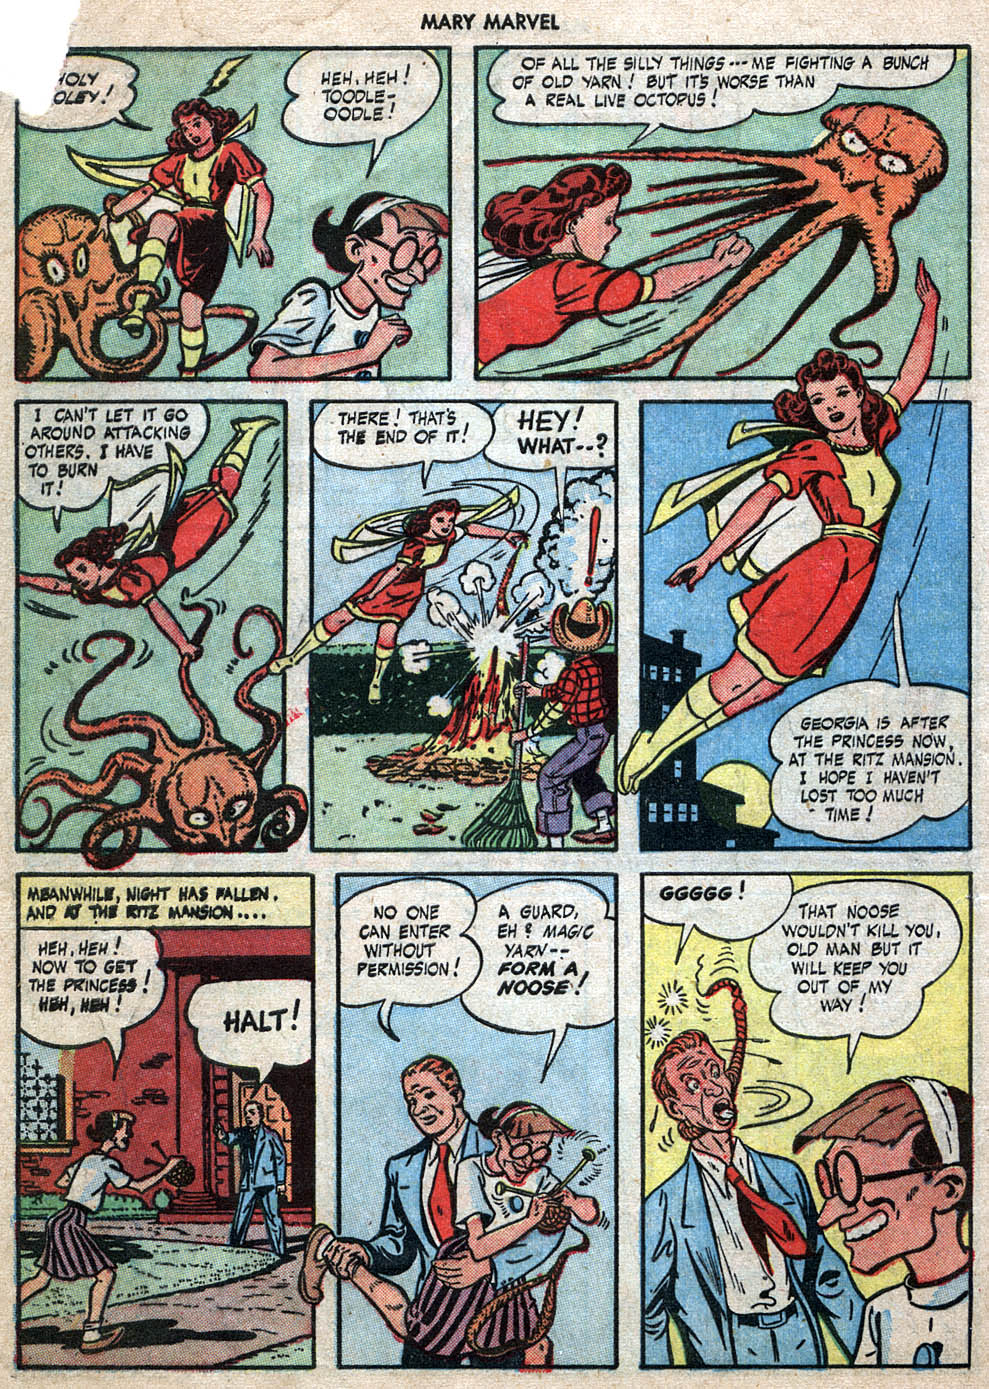 Read online Mary Marvel comic -  Issue #2 - 9